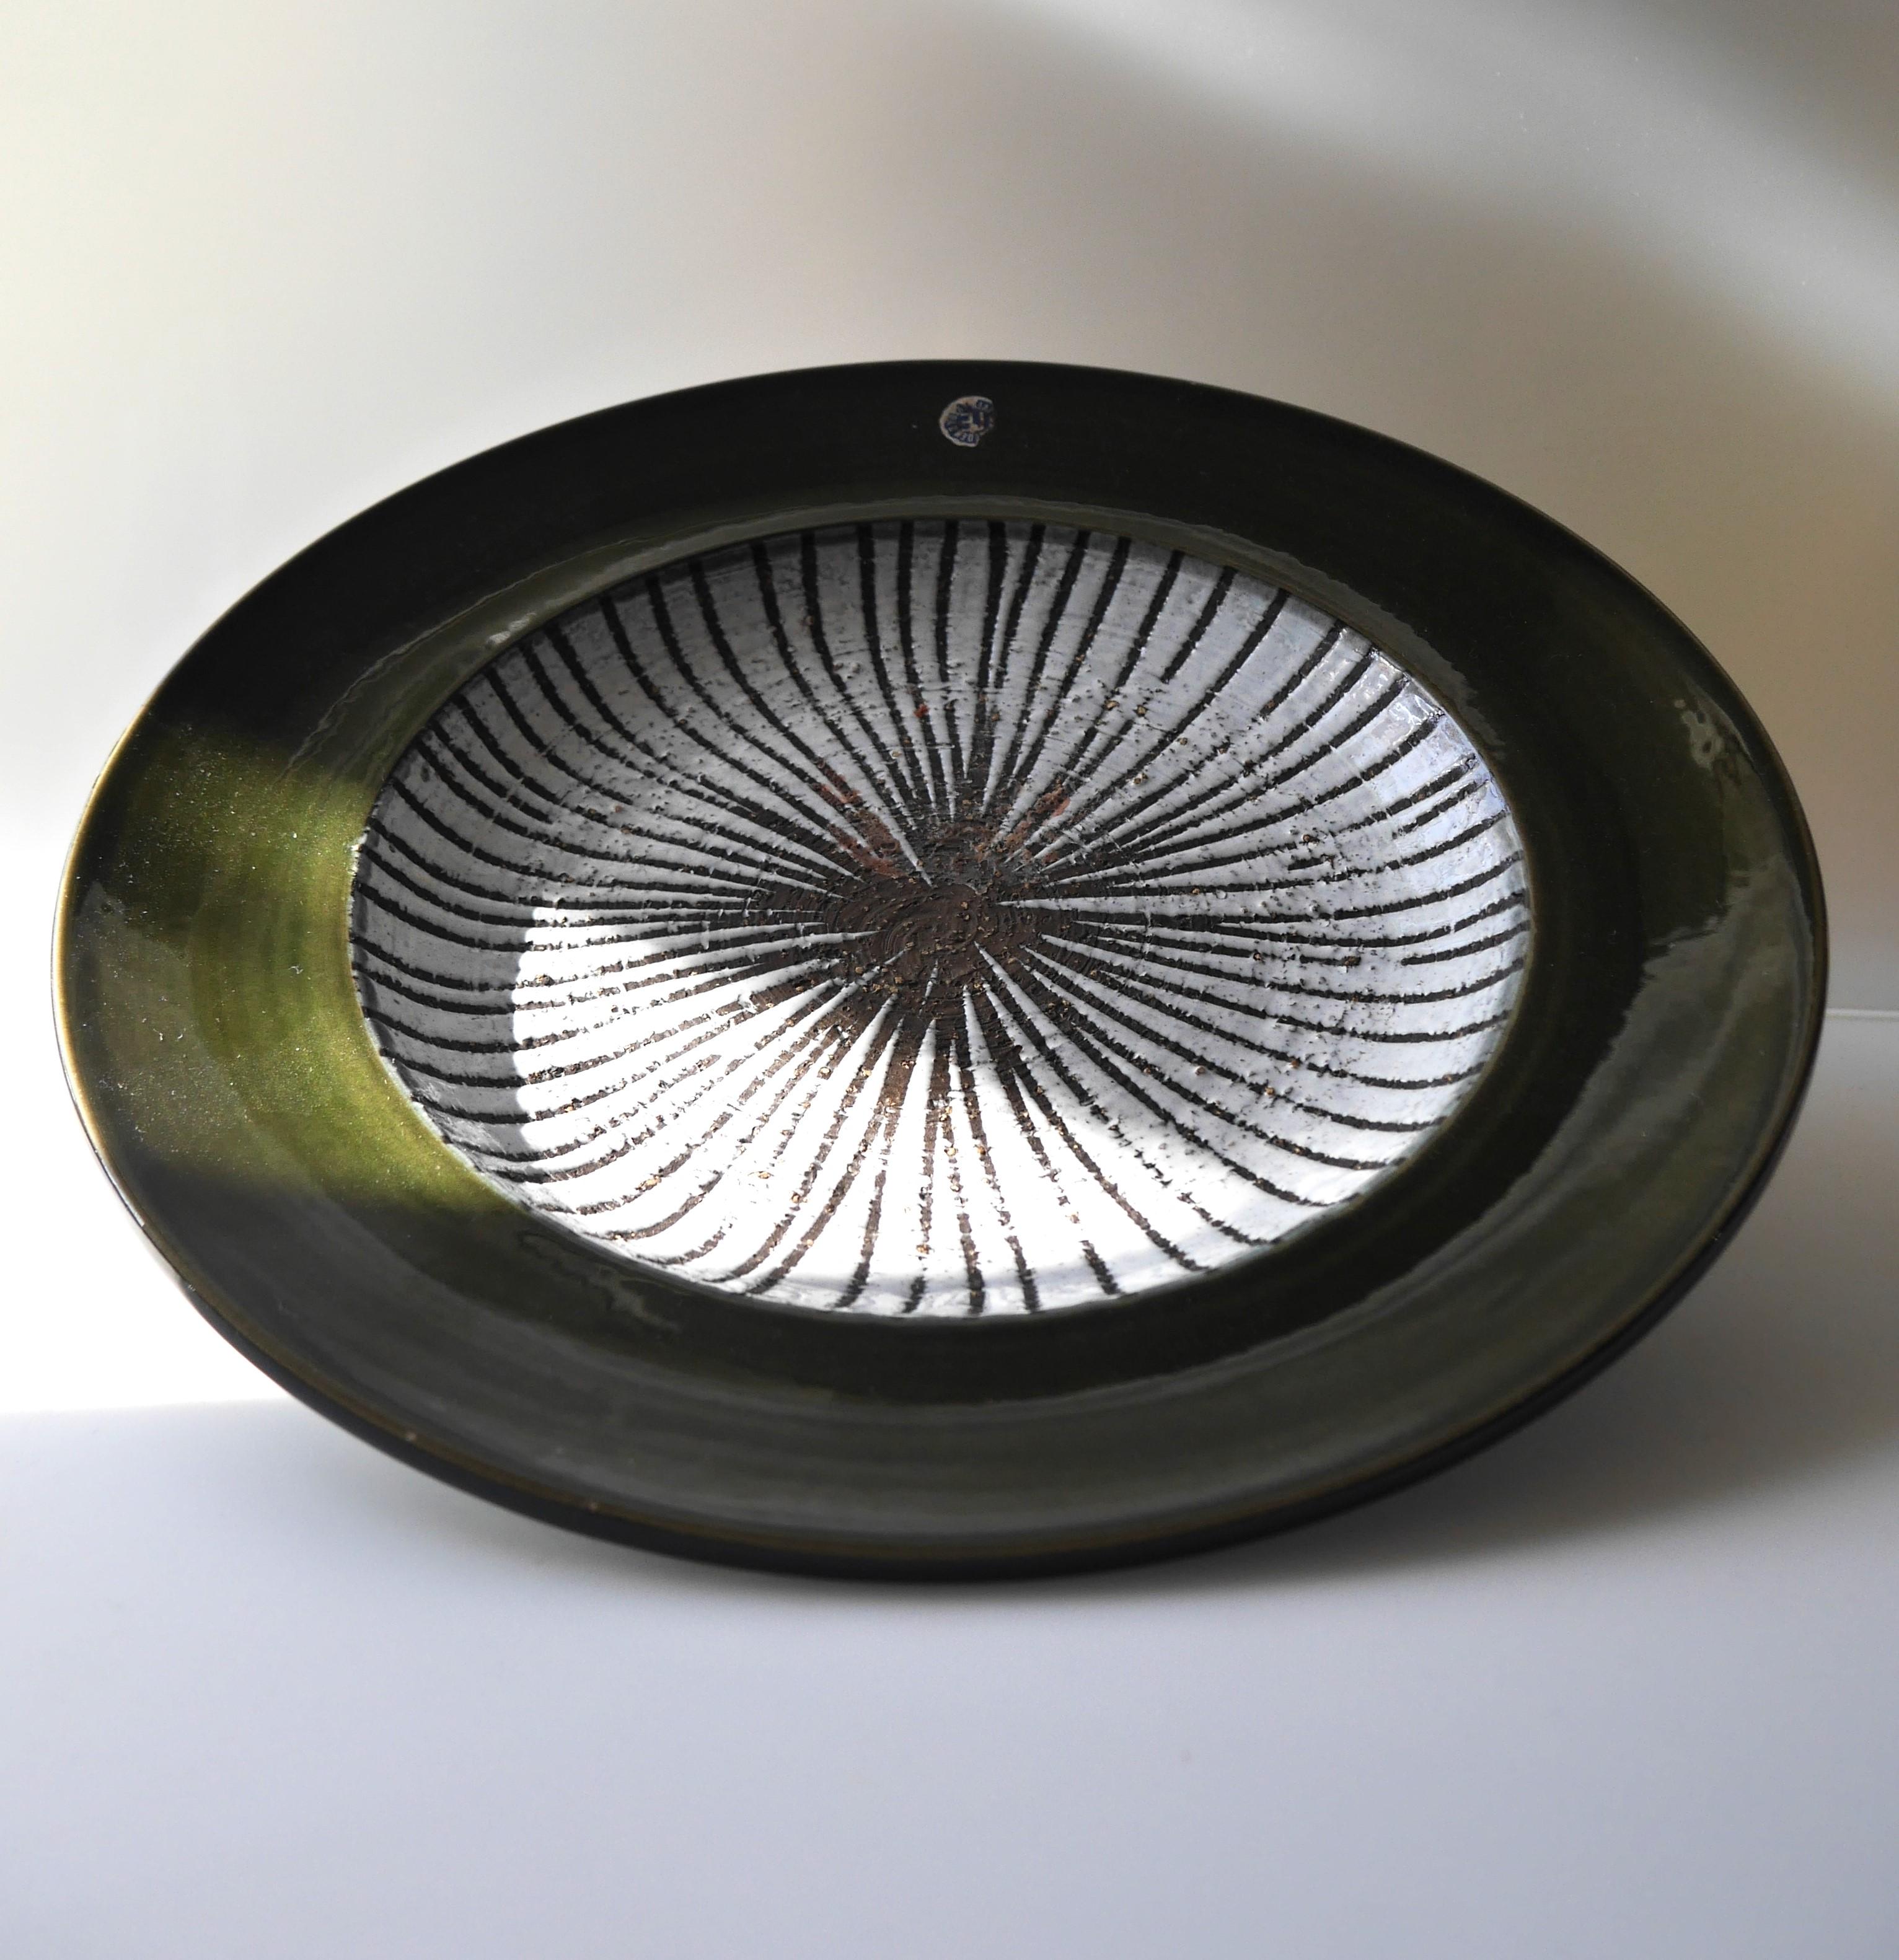 'Cleo' bowl or plate by Mari Simmulson for Upsala Ekeby, Sweden 2